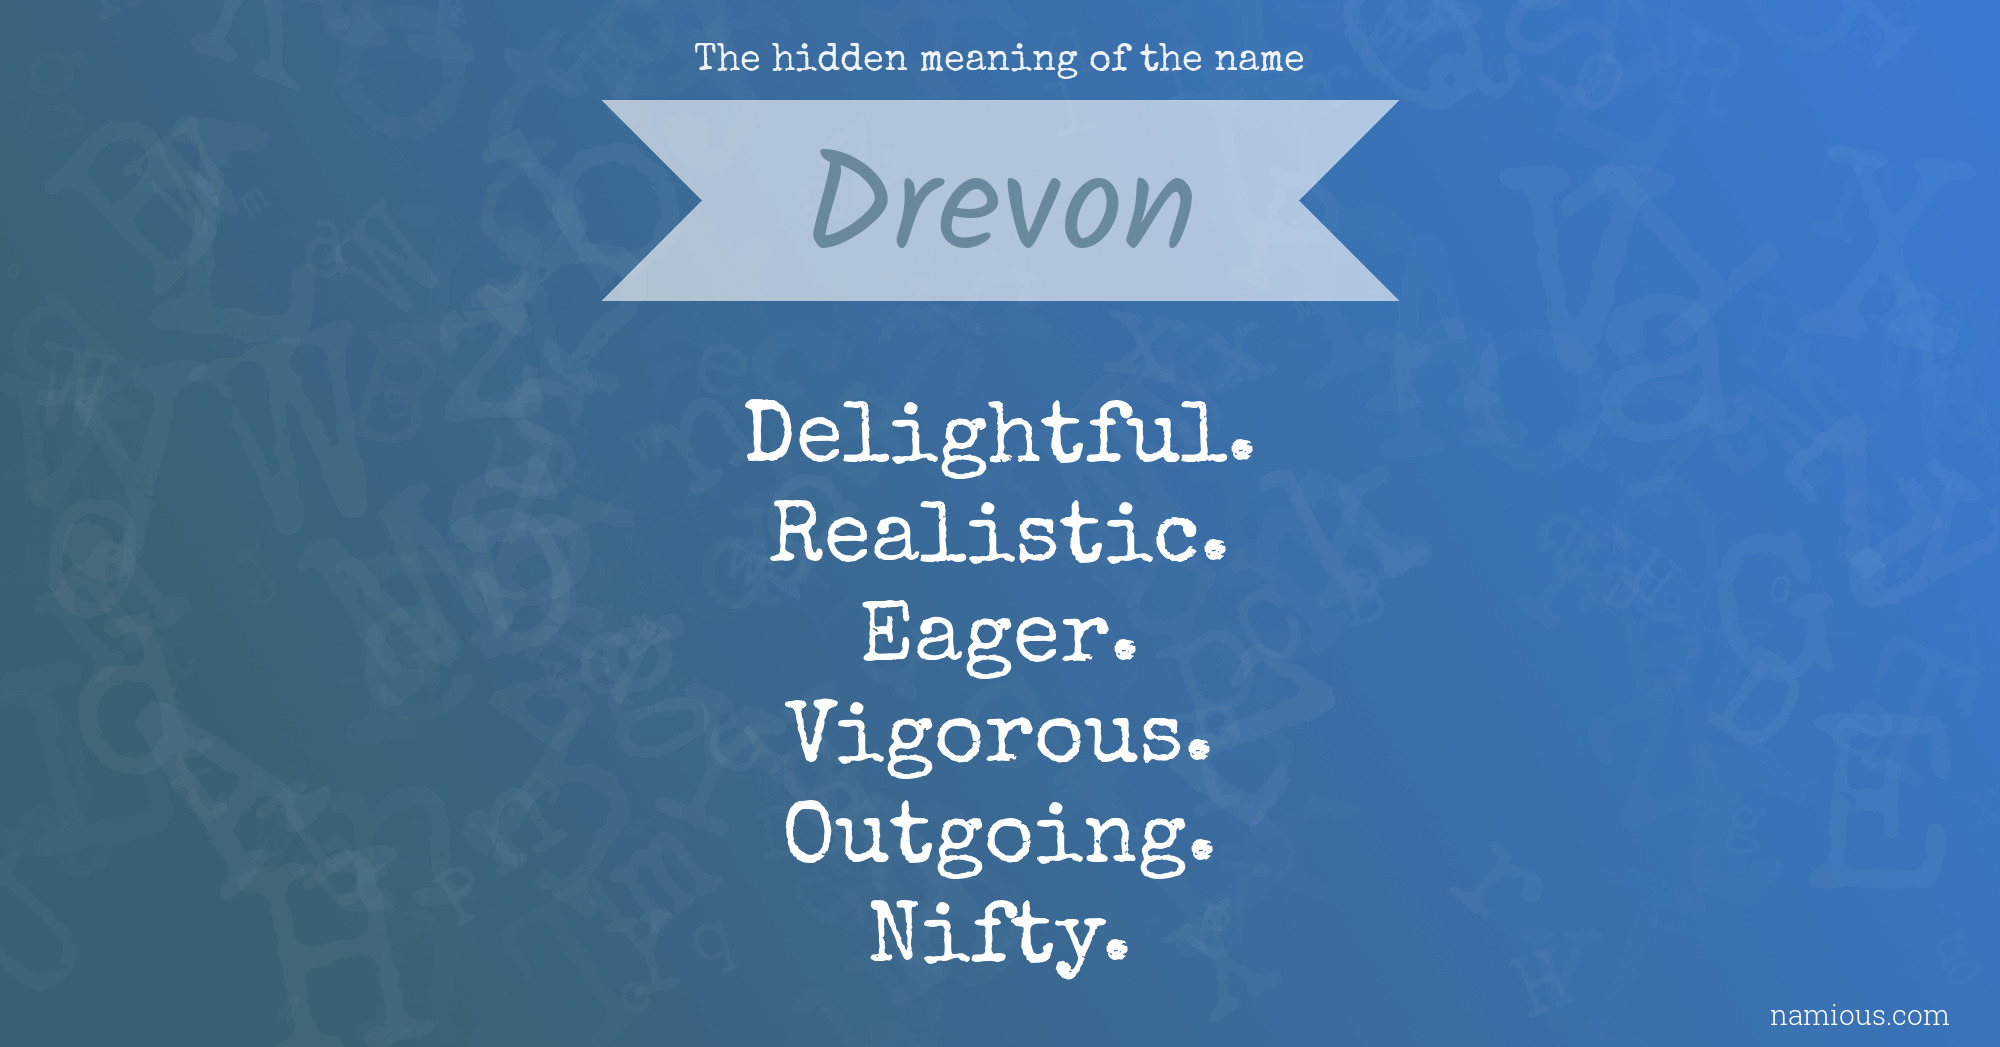 The hidden meaning of the name Drevon